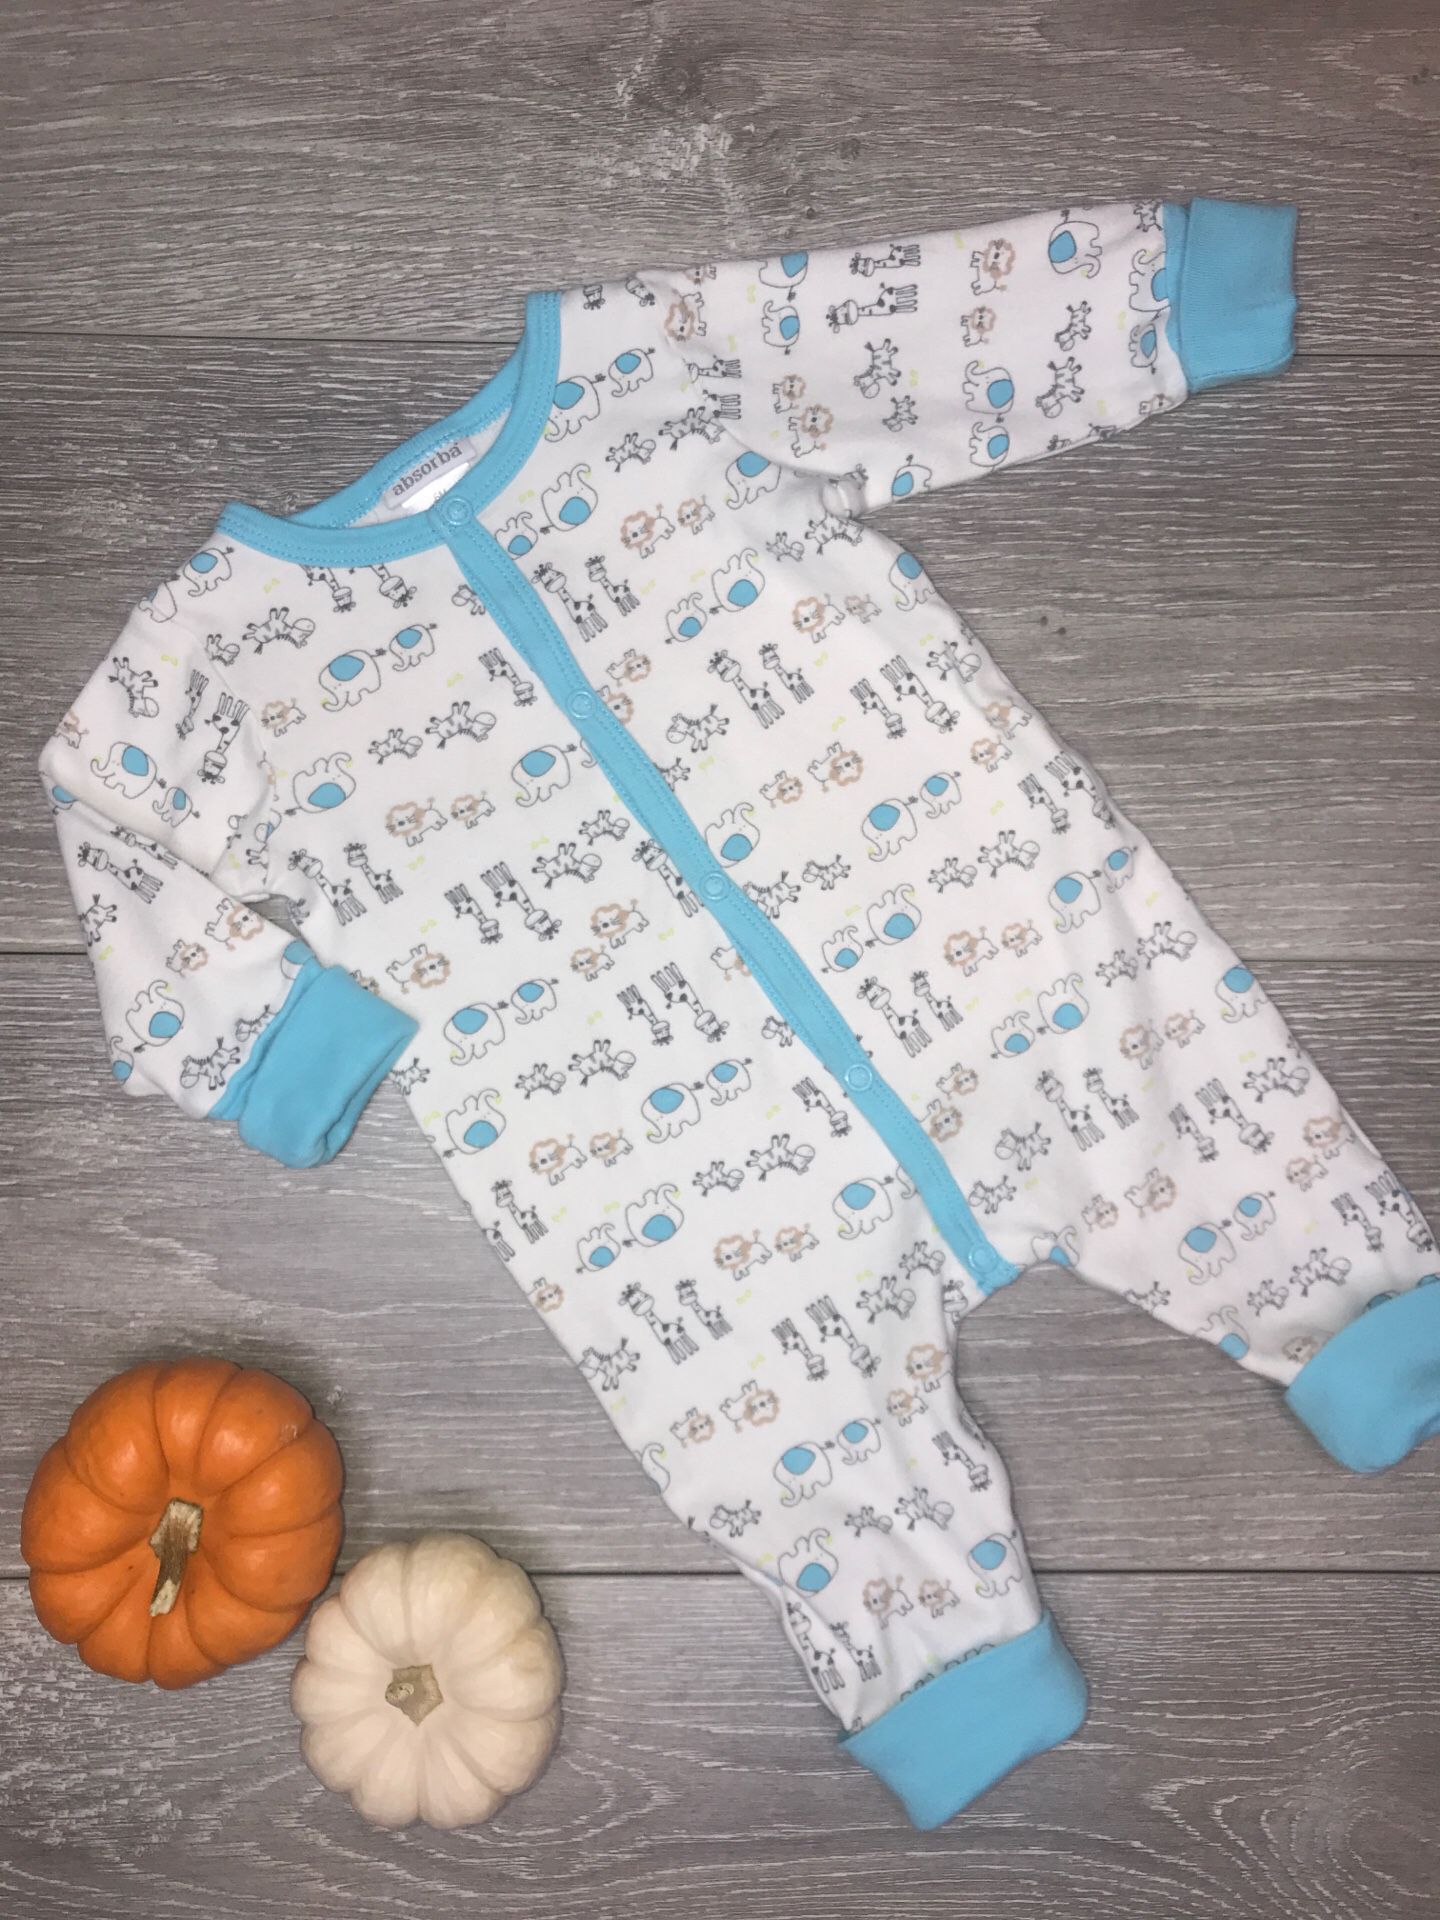 Baby Boy Clothing Absorba 6 Months $2.50